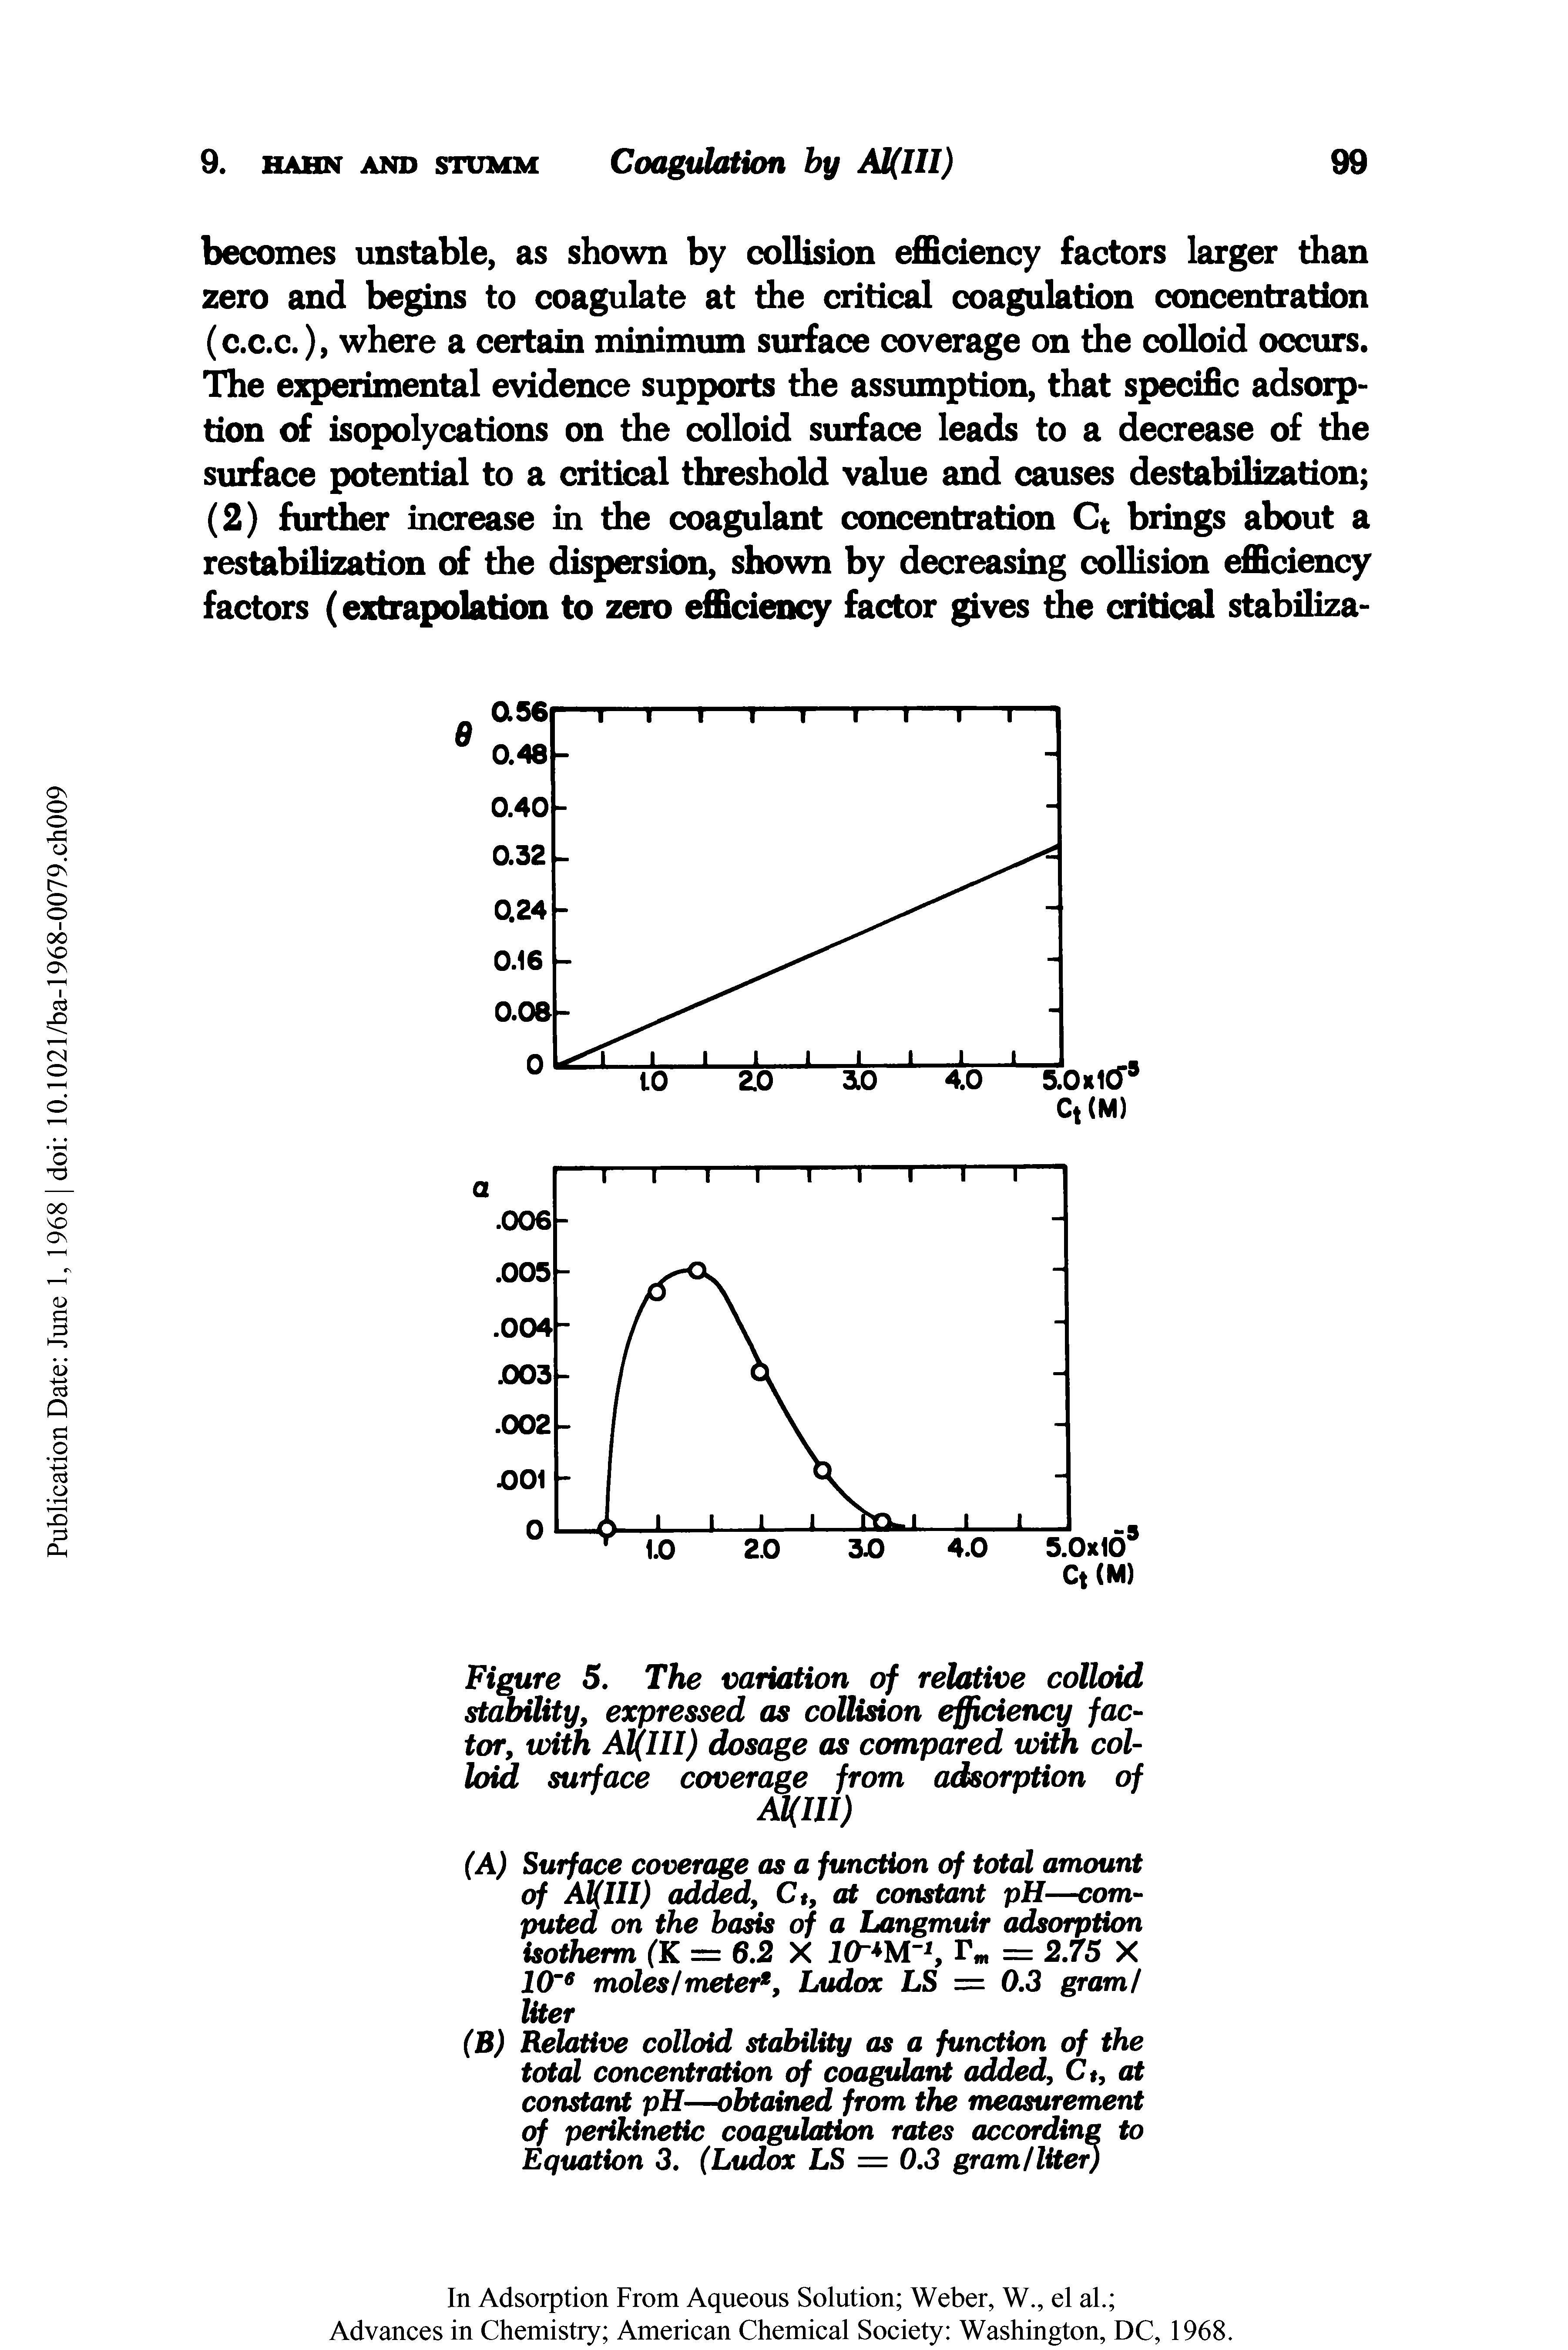 Figure 5. The variation of relative colloid stability, expressed as collision efficiency factor, with A1(III) dosage as compared with colloid surface coverage from adsorption of Al(lll)...